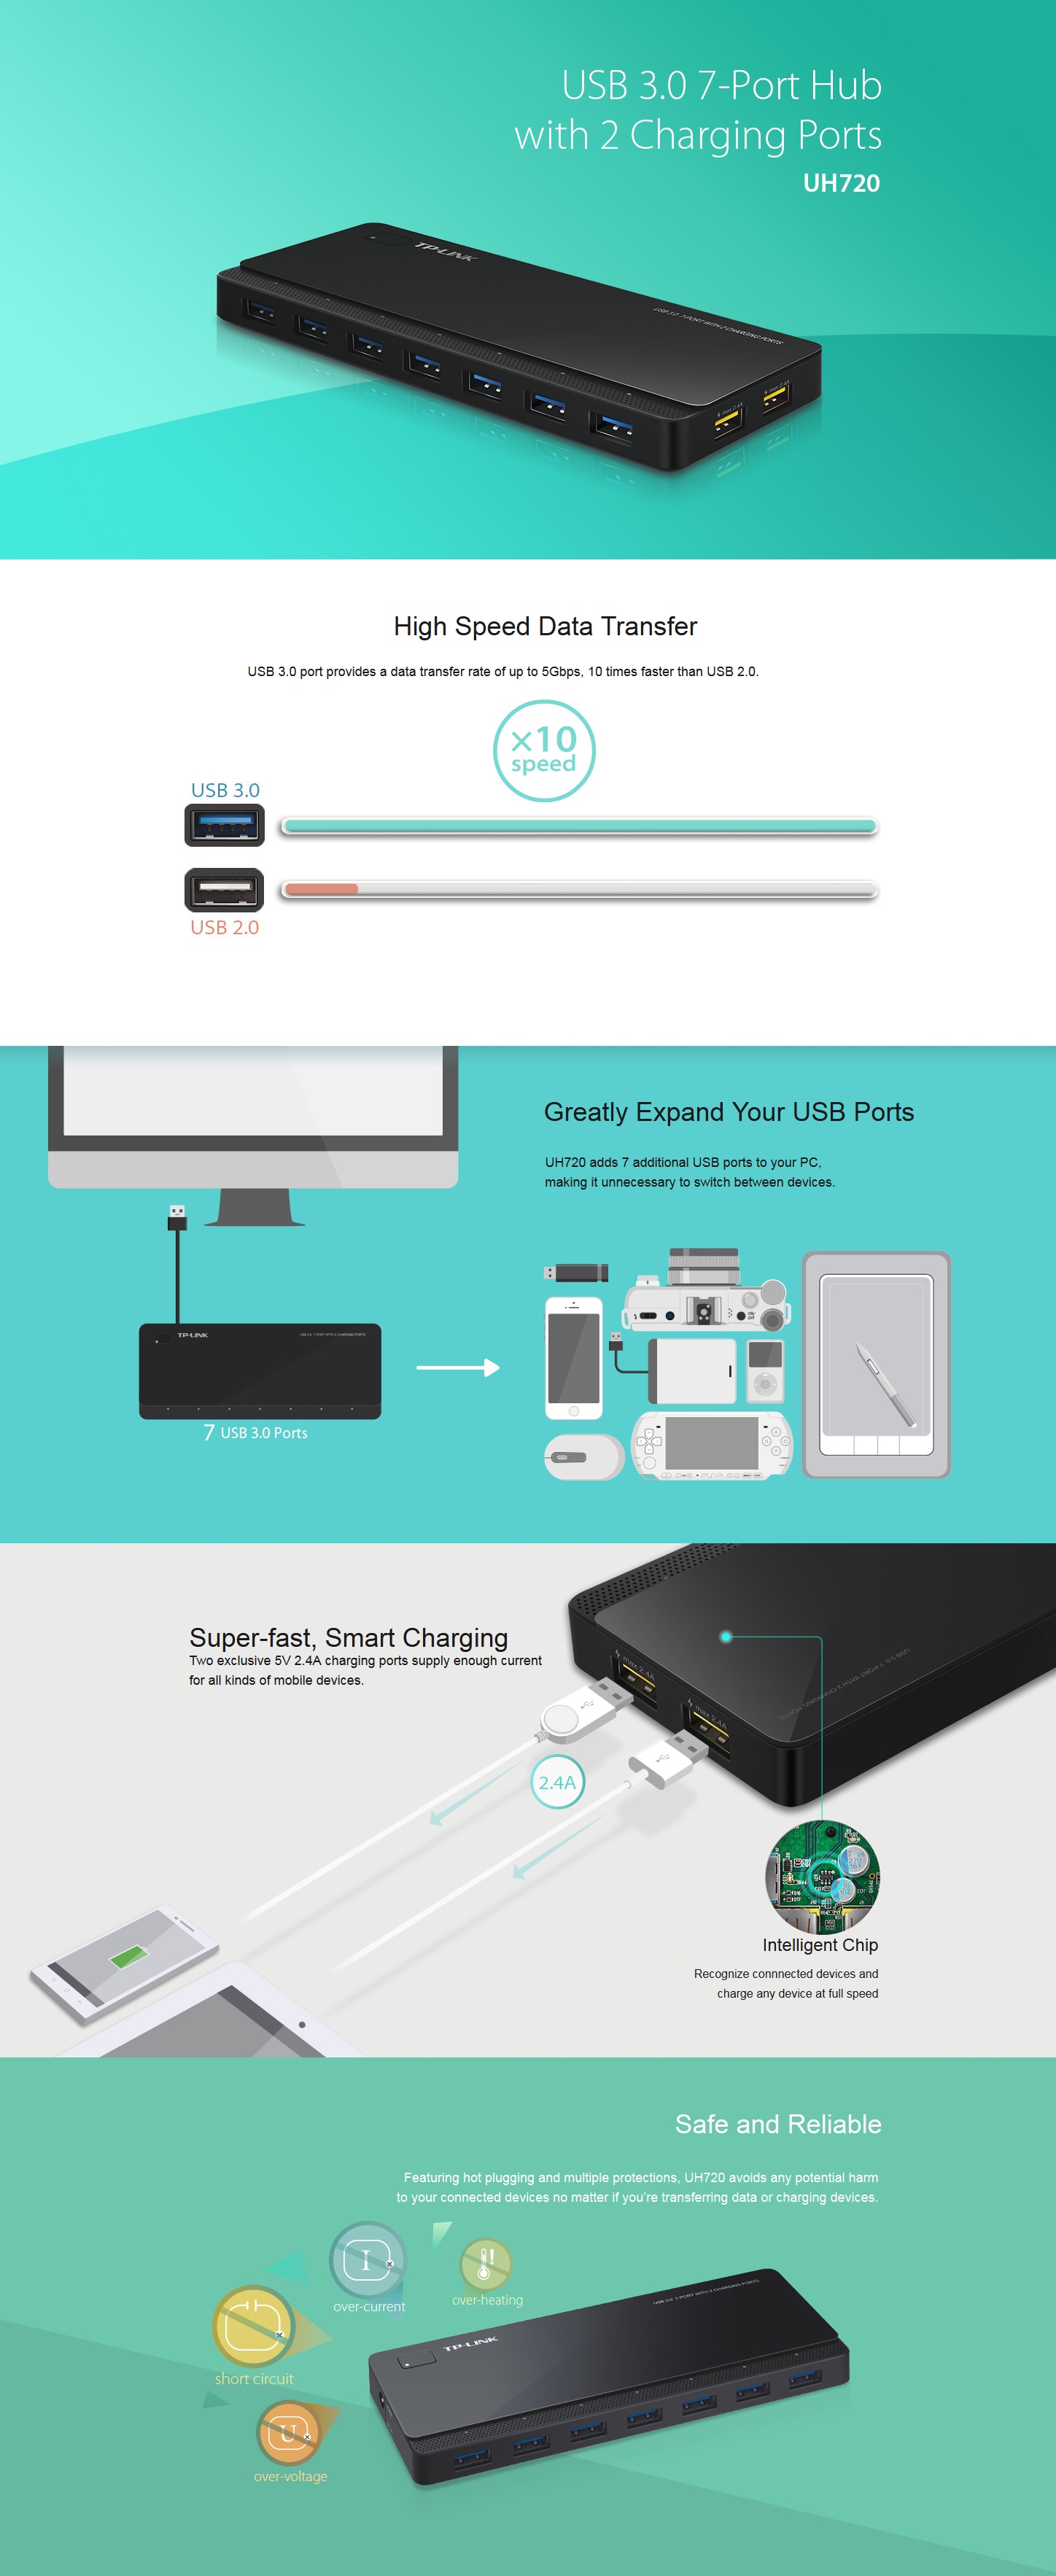 A large marketing image providing additional information about the product TP-Link UH720 - 7-Port USB 3.0 Hub with Charging - Additional alt info not provided